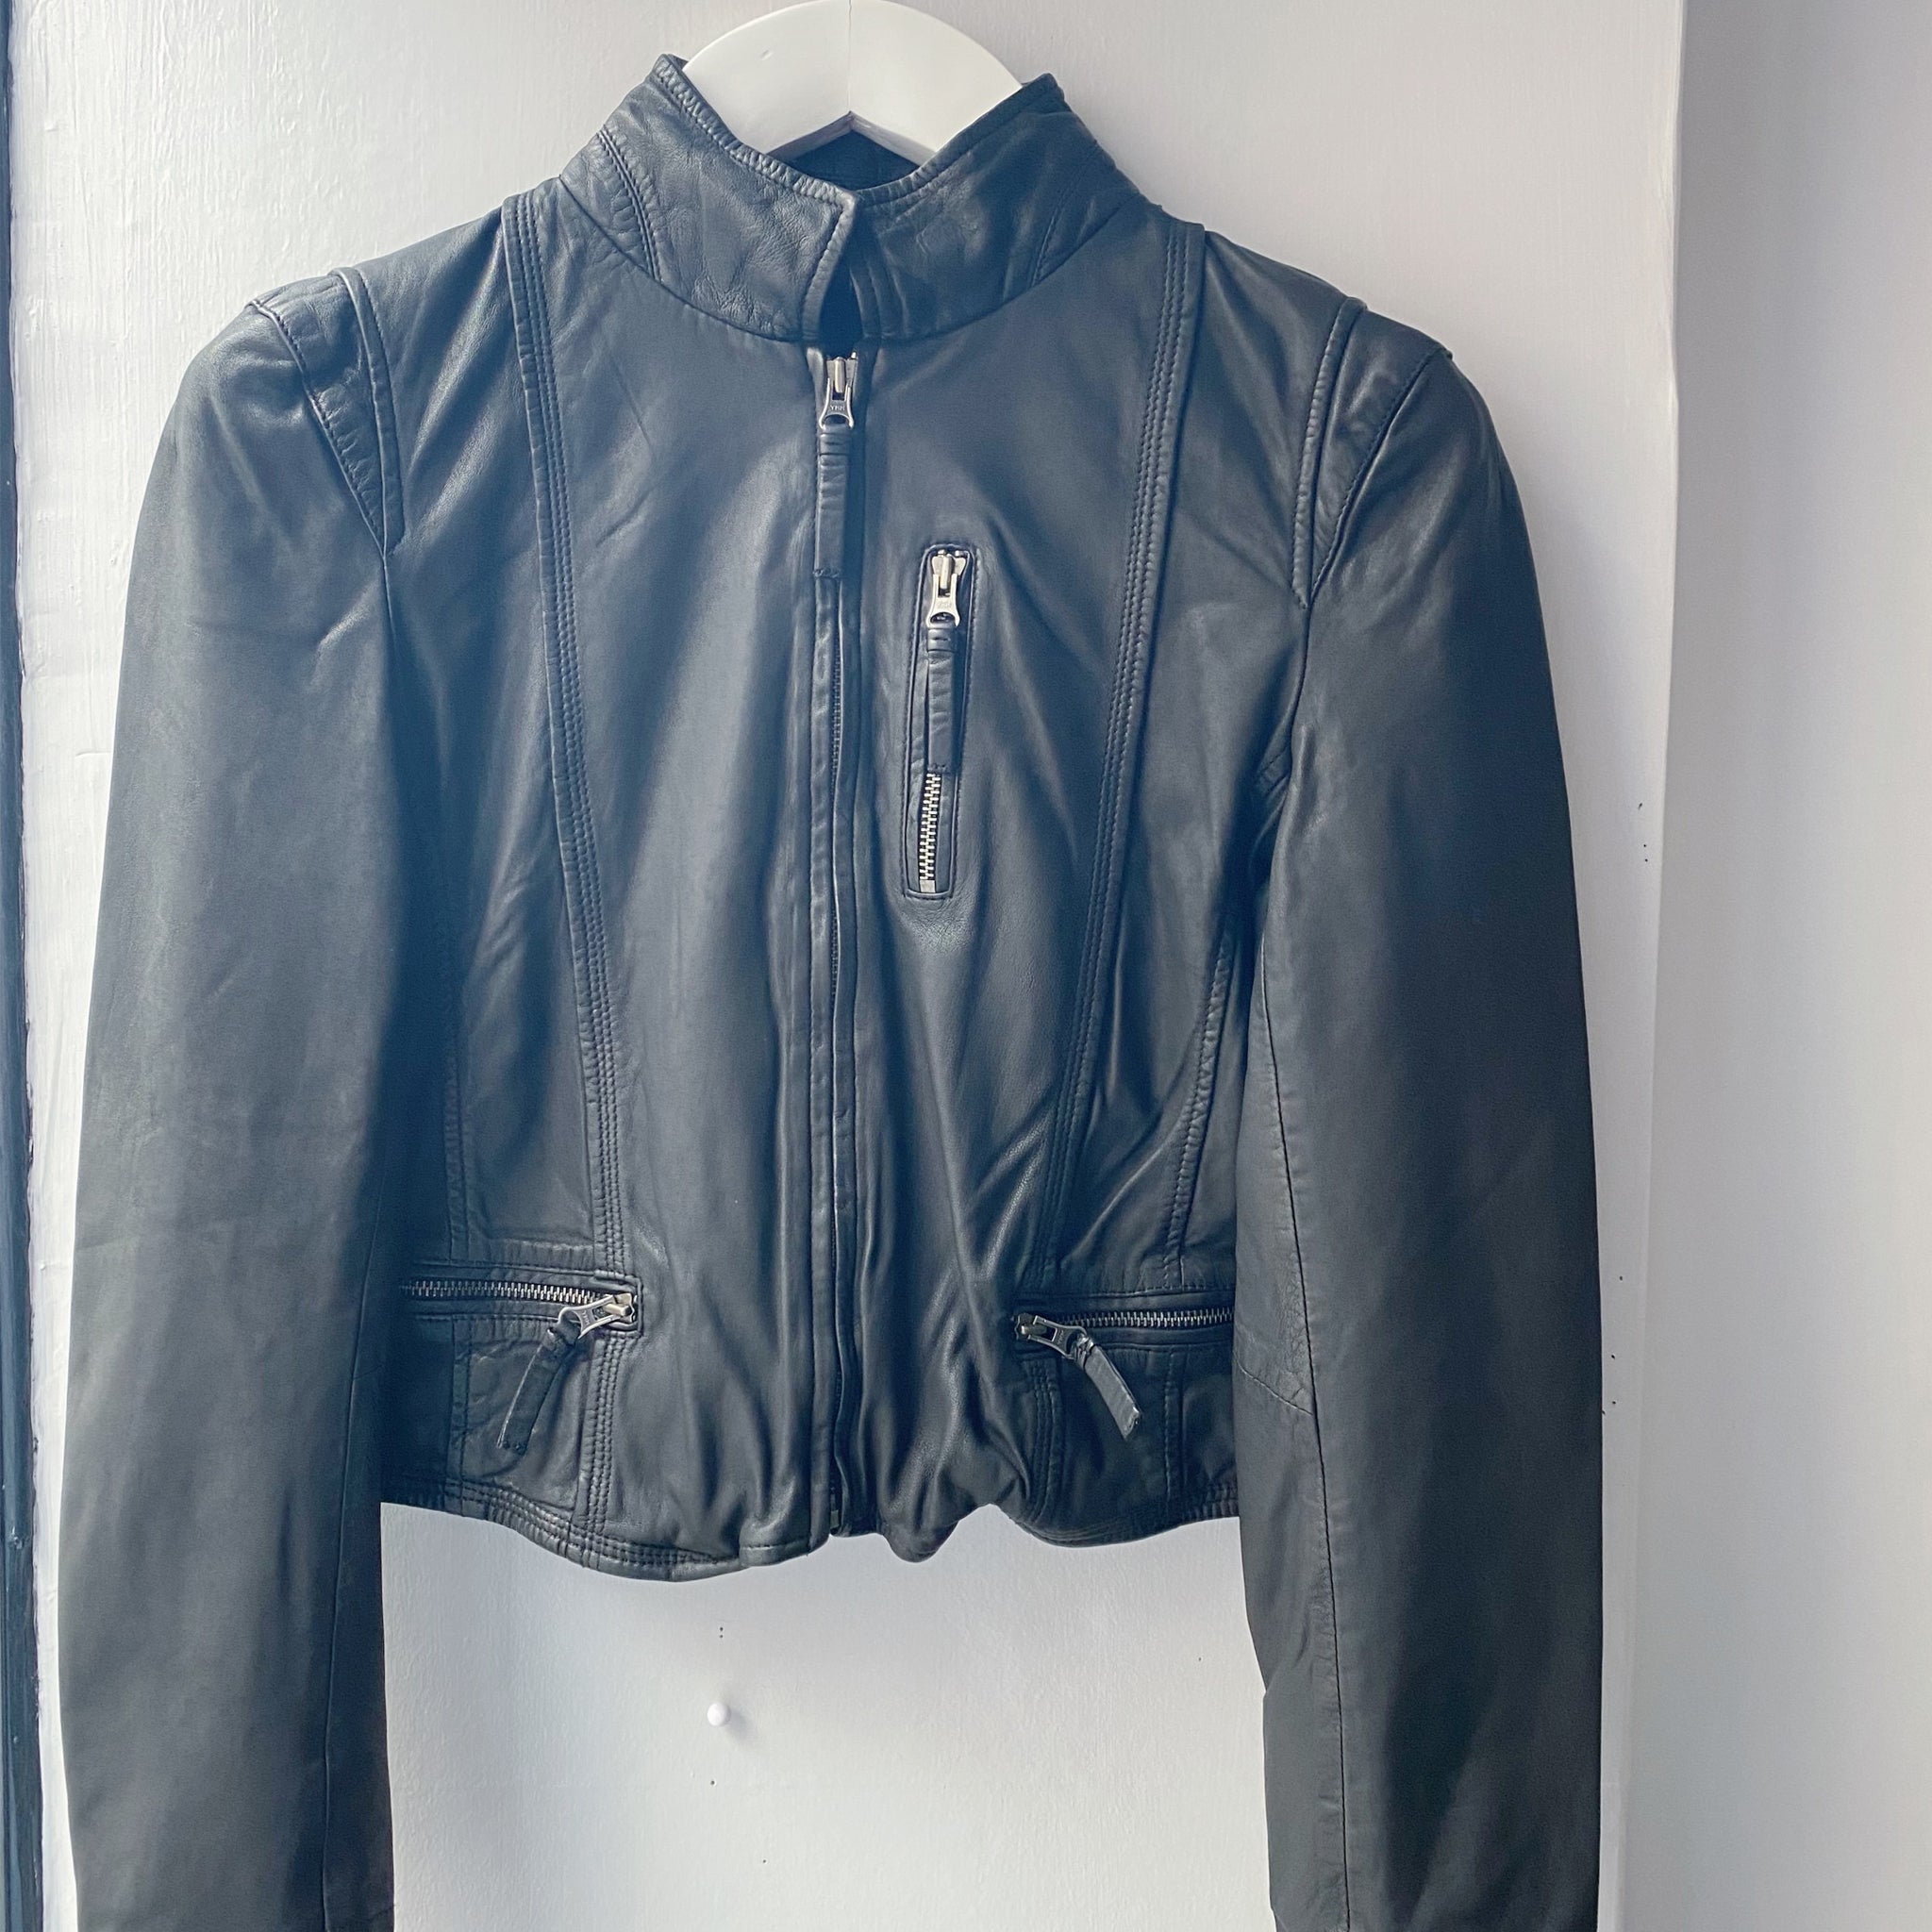 Description: A MDK Leather Rucy Jacket - Black zipped on a wall.